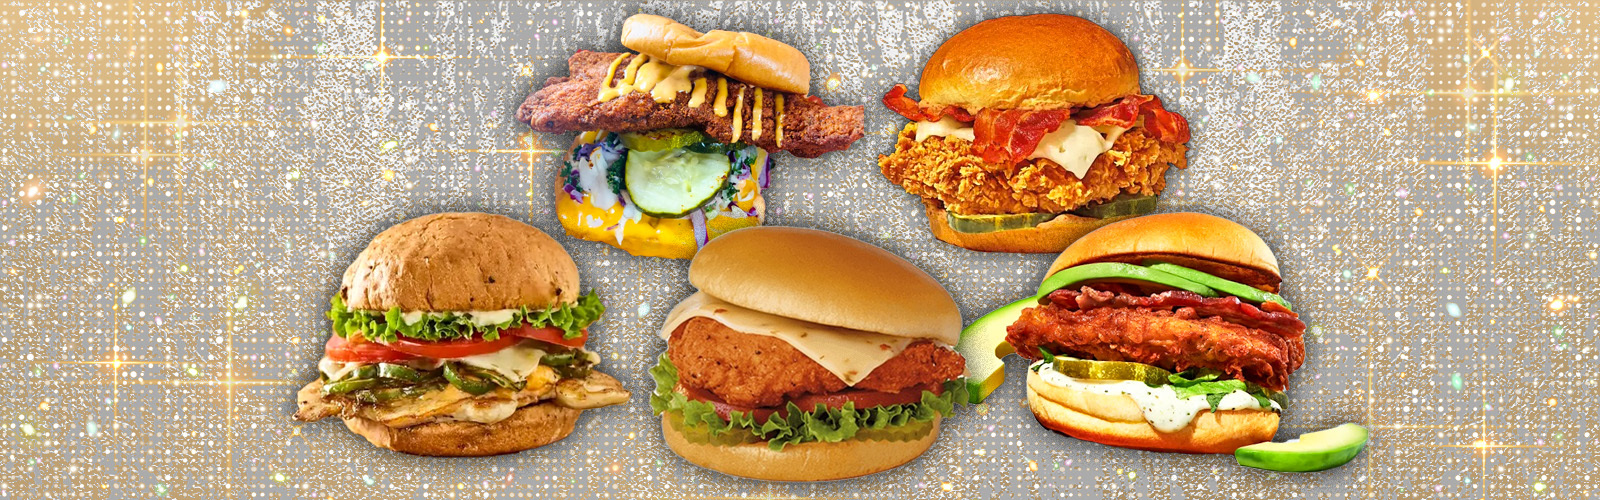 The Best Chicken Sandwiches Your Money Can Buy(1600x500) (1)